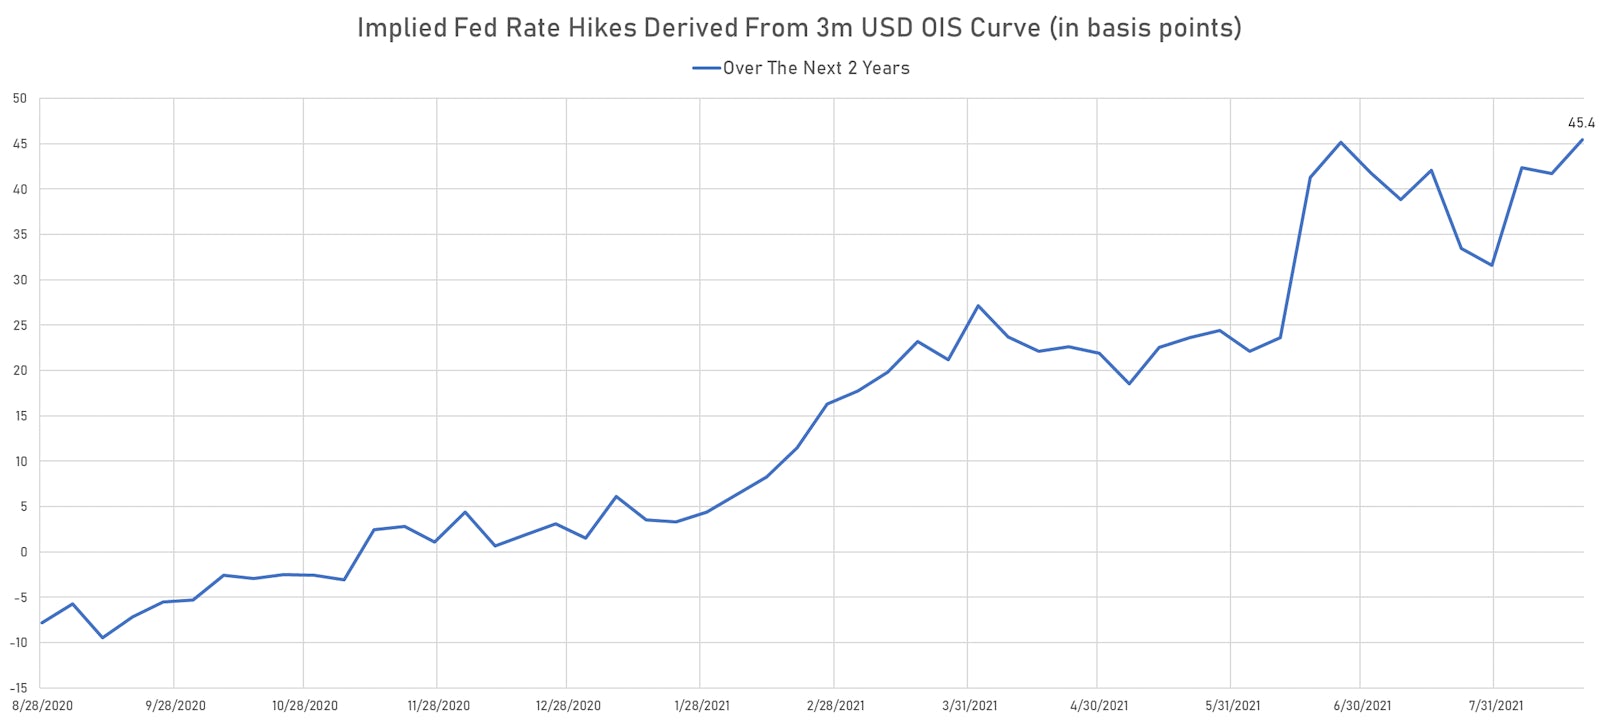 Implied Fed Hikes Over The Next 2 Years Derived From The 3-month USD OIS Forward Curve | Sources: ϕpost, Refinitiv data